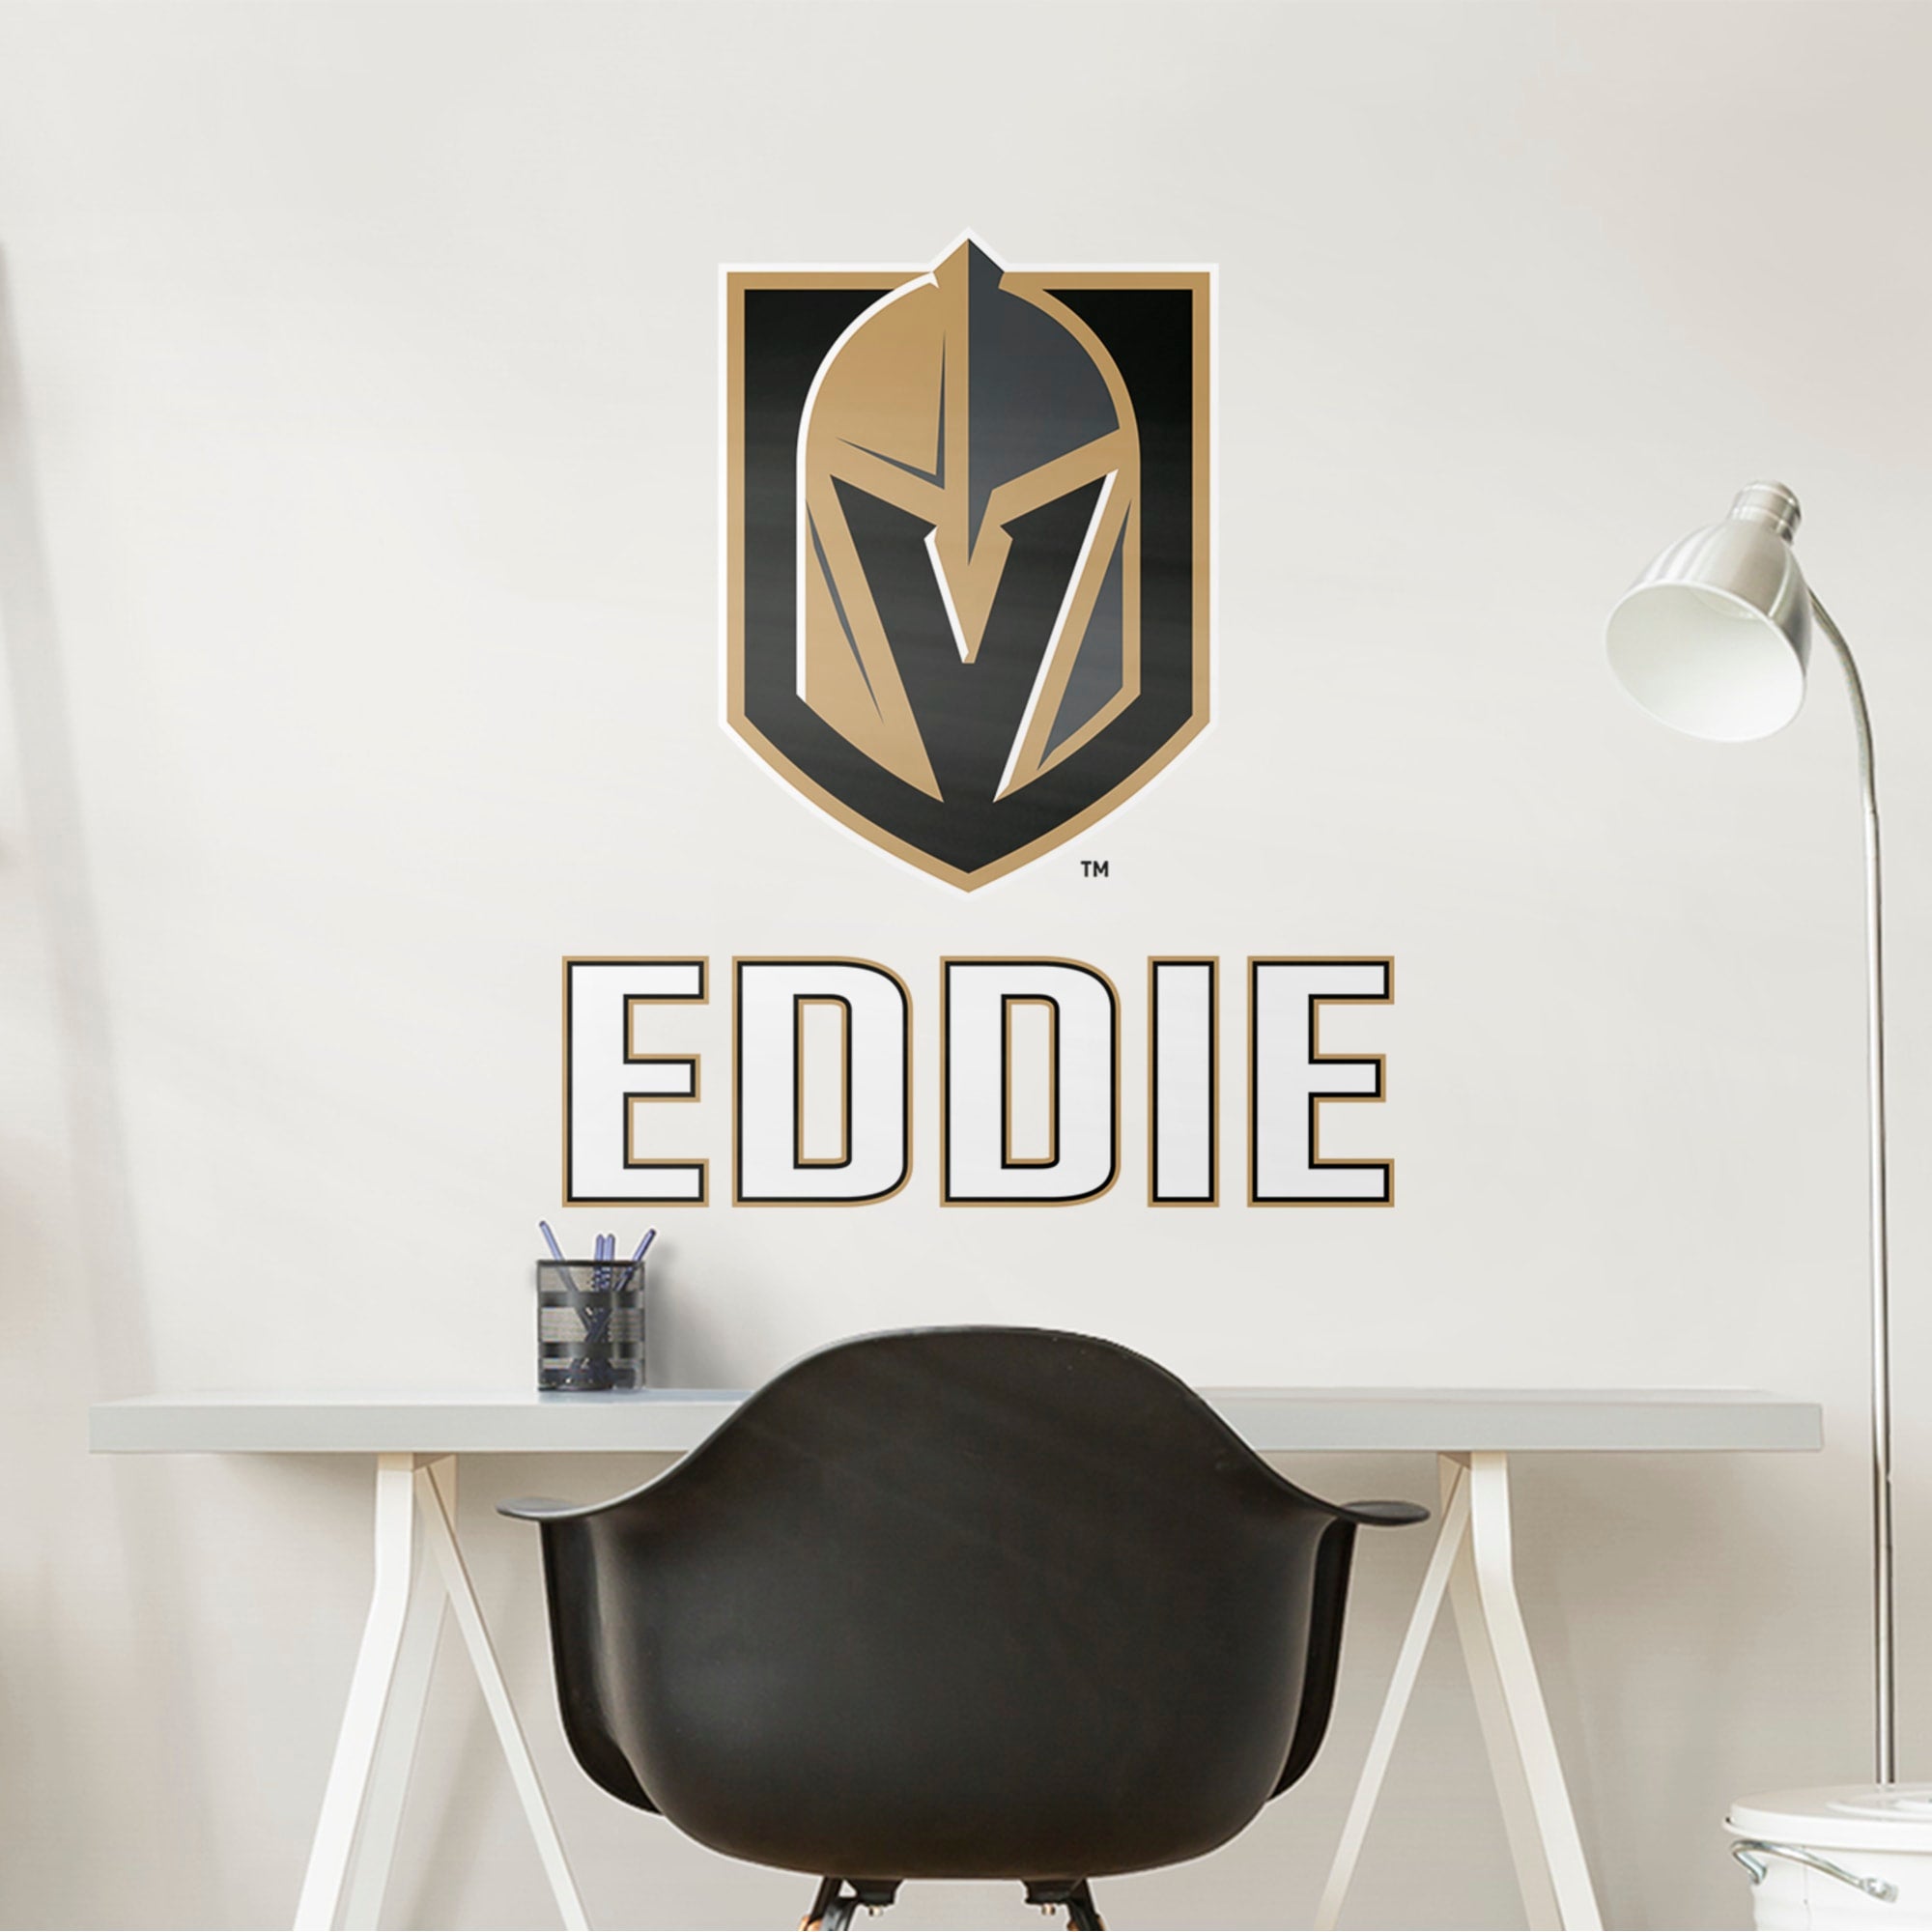 Vegas Golden Knights: Stacked Personalized Name - Officially Licensed NHL Transfer Decal in White by Fathead | Vinyl